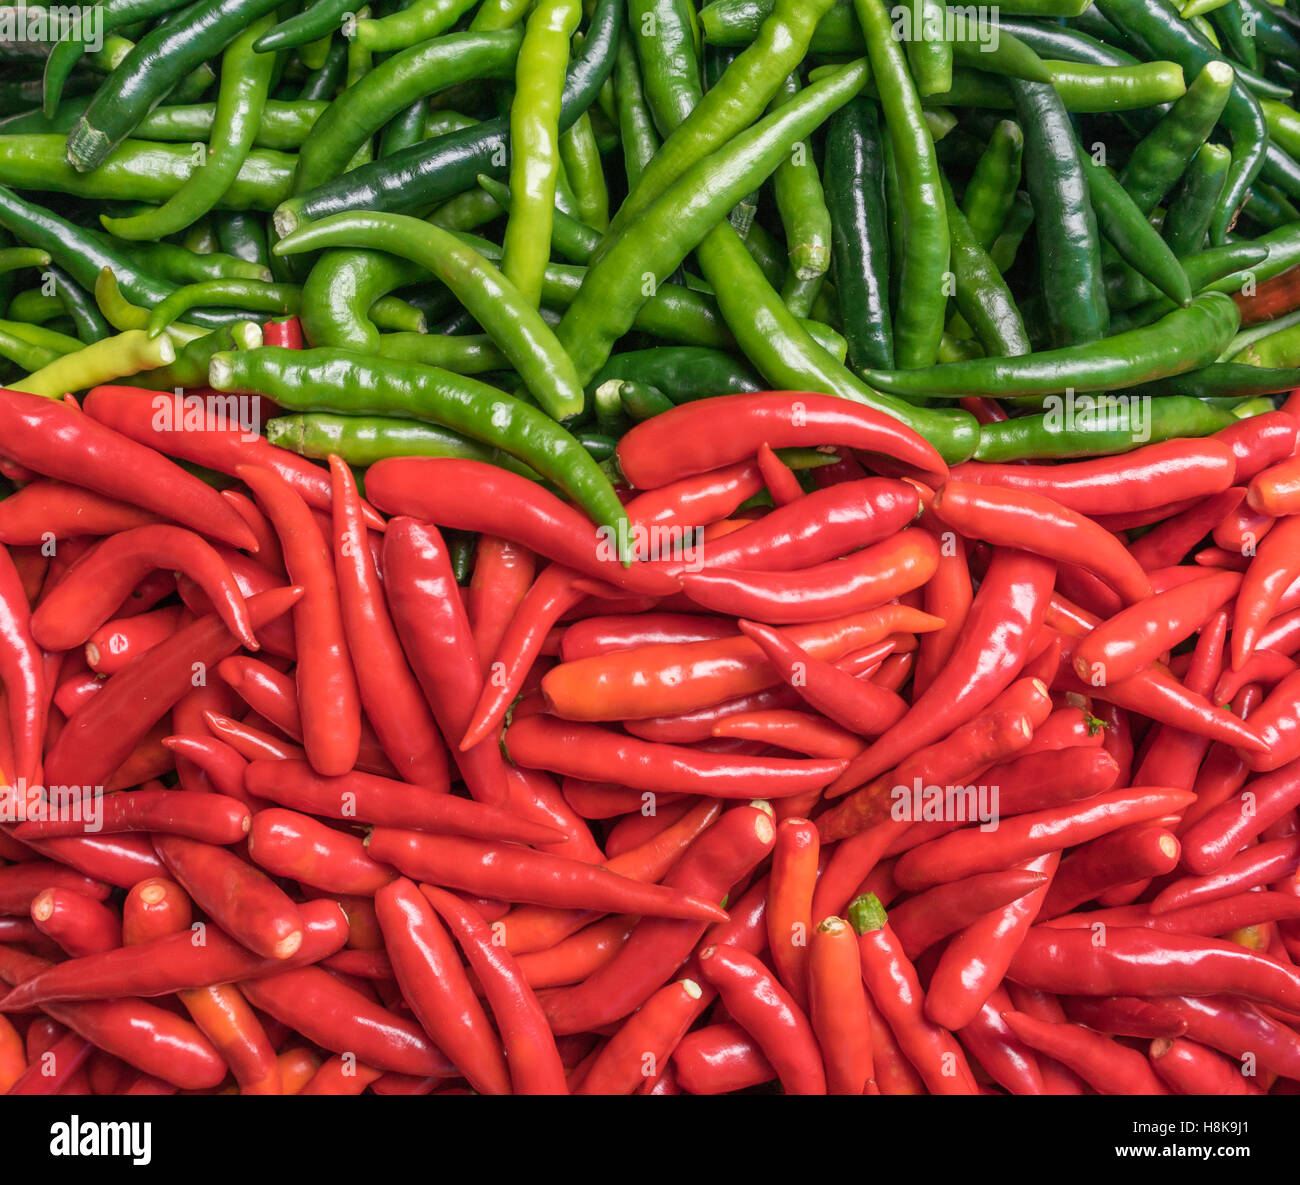 fresh red and green chili pepper background Stock Photo